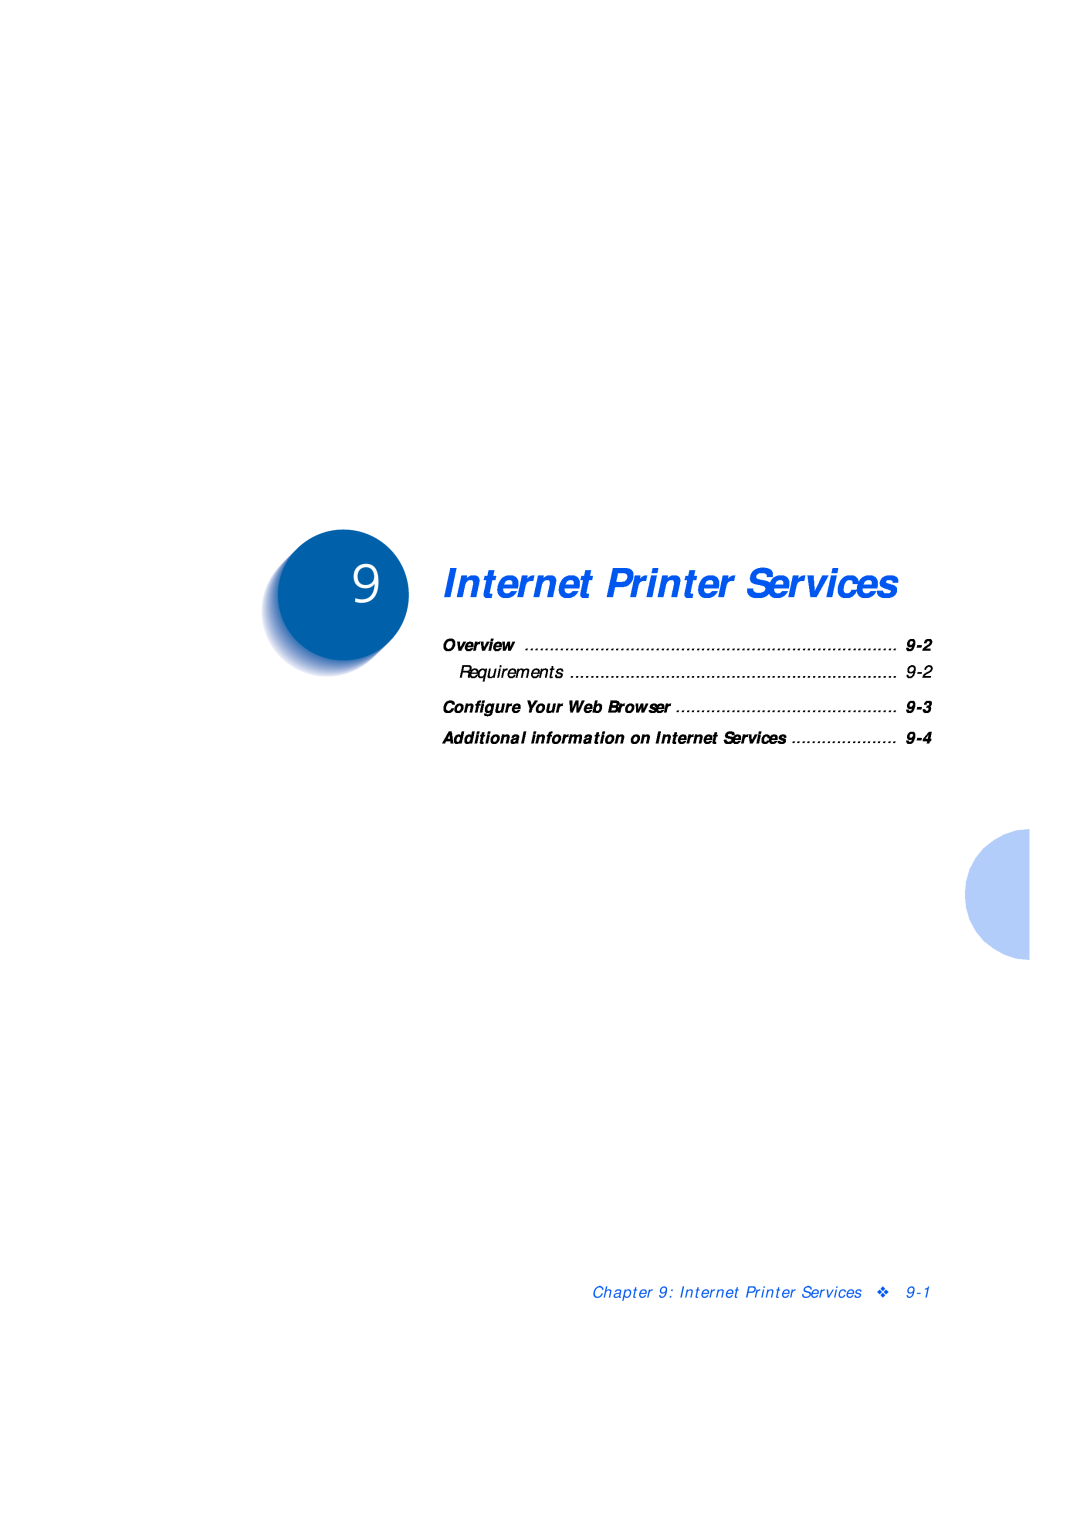 Xerox Network Laser Printers manual Internet Printer Services, Overview, Requirements, Configure Your Web Browser 